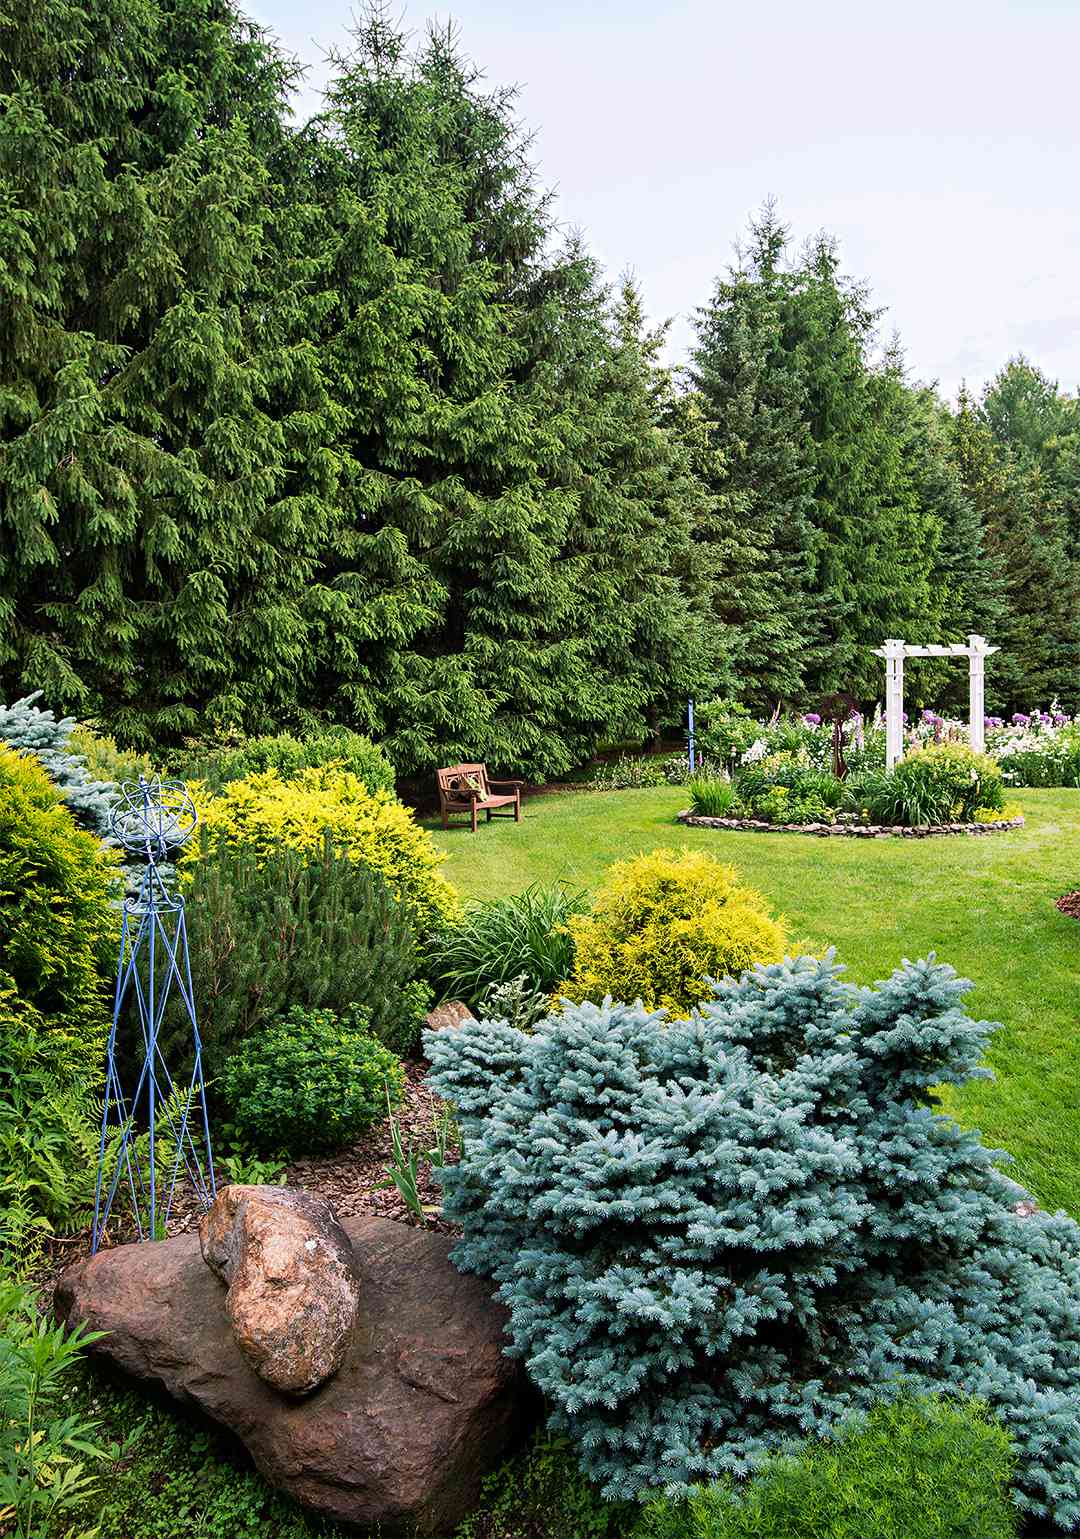 Best Evergreen Trees for Privacy | Better Homes & Gardens